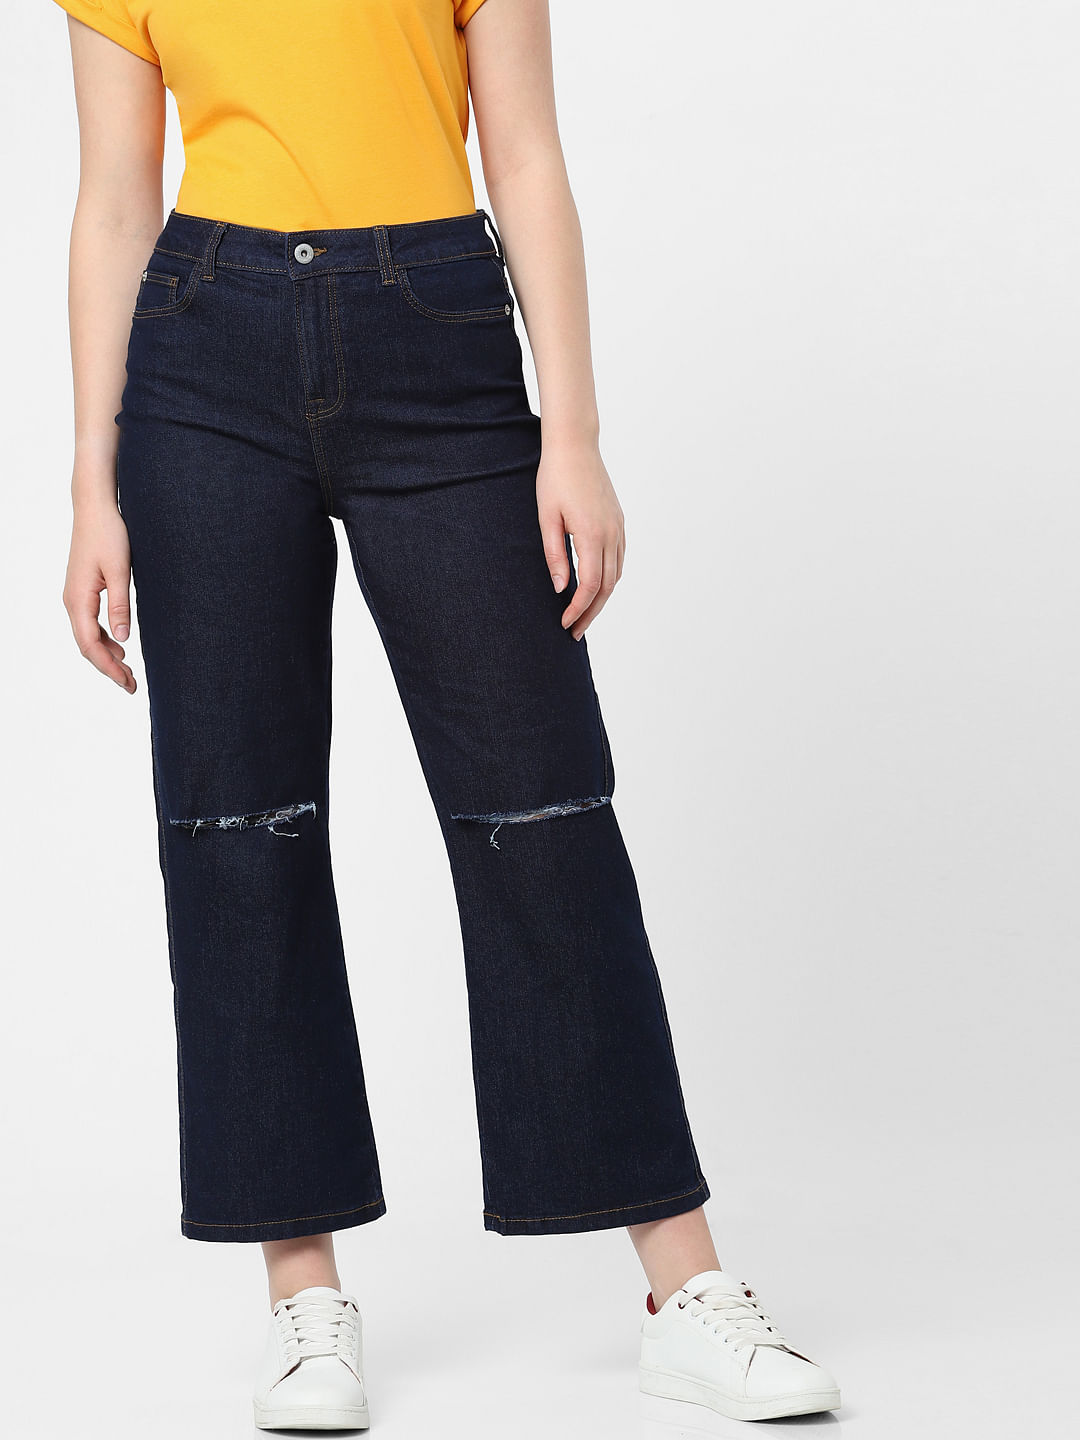 Best Places to Buy Jeans Online from Cheap & Trendy to Designer Denim